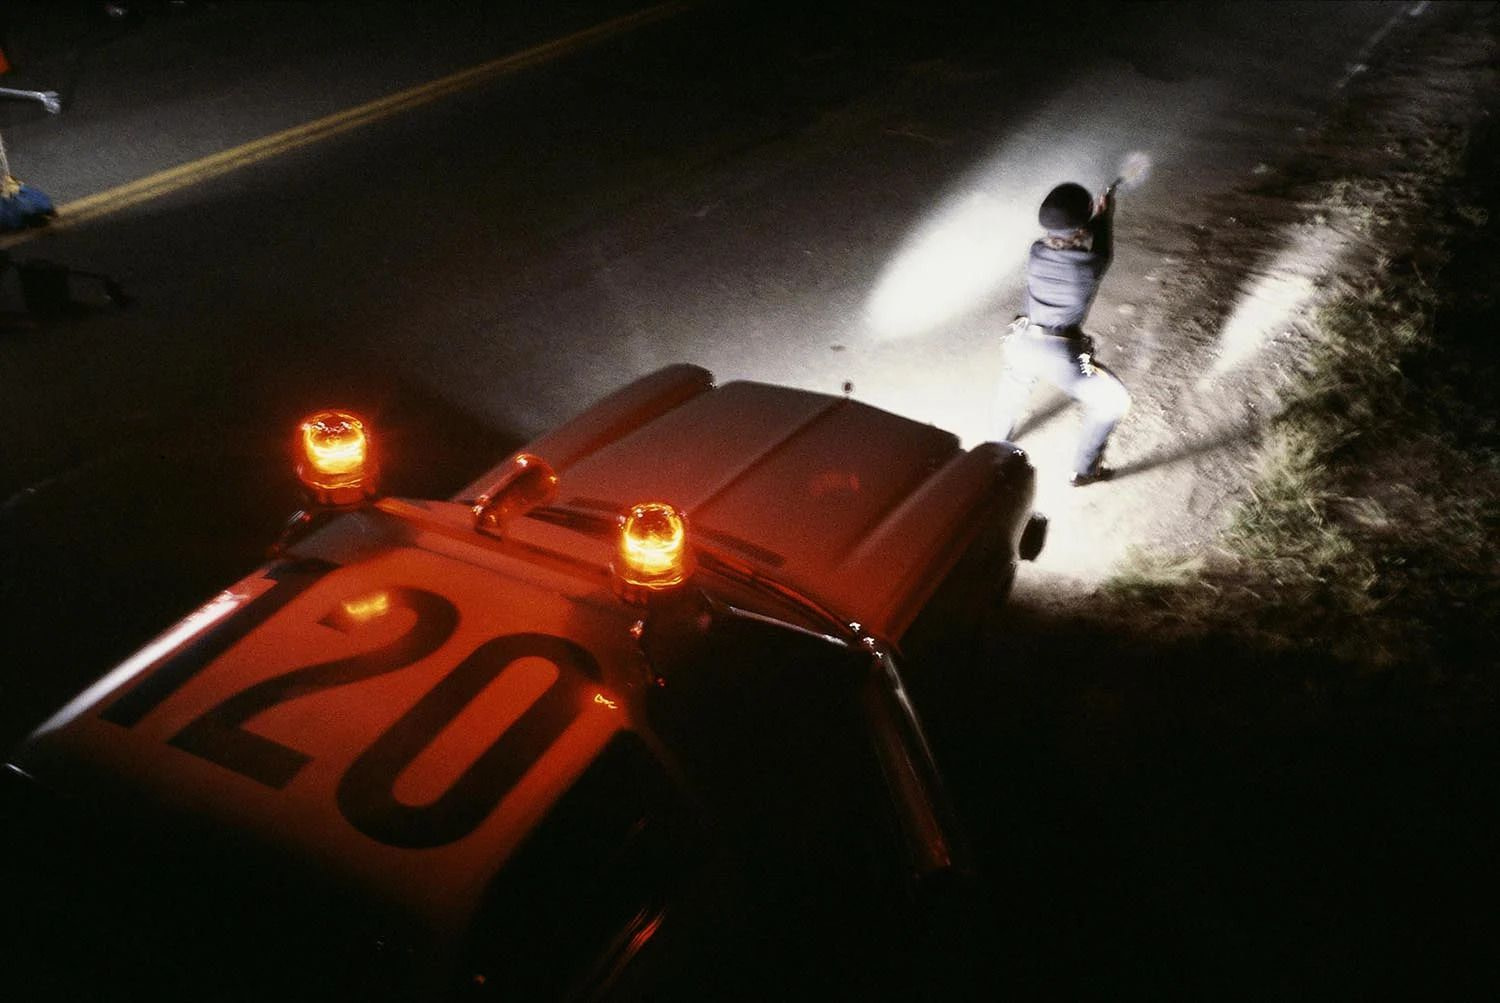 An overhead shot of a police officer wearing a cap squatting in front of a police cruiser at night, their back illuminated by the car’s headlights while aiming their pistol at something off-screen.